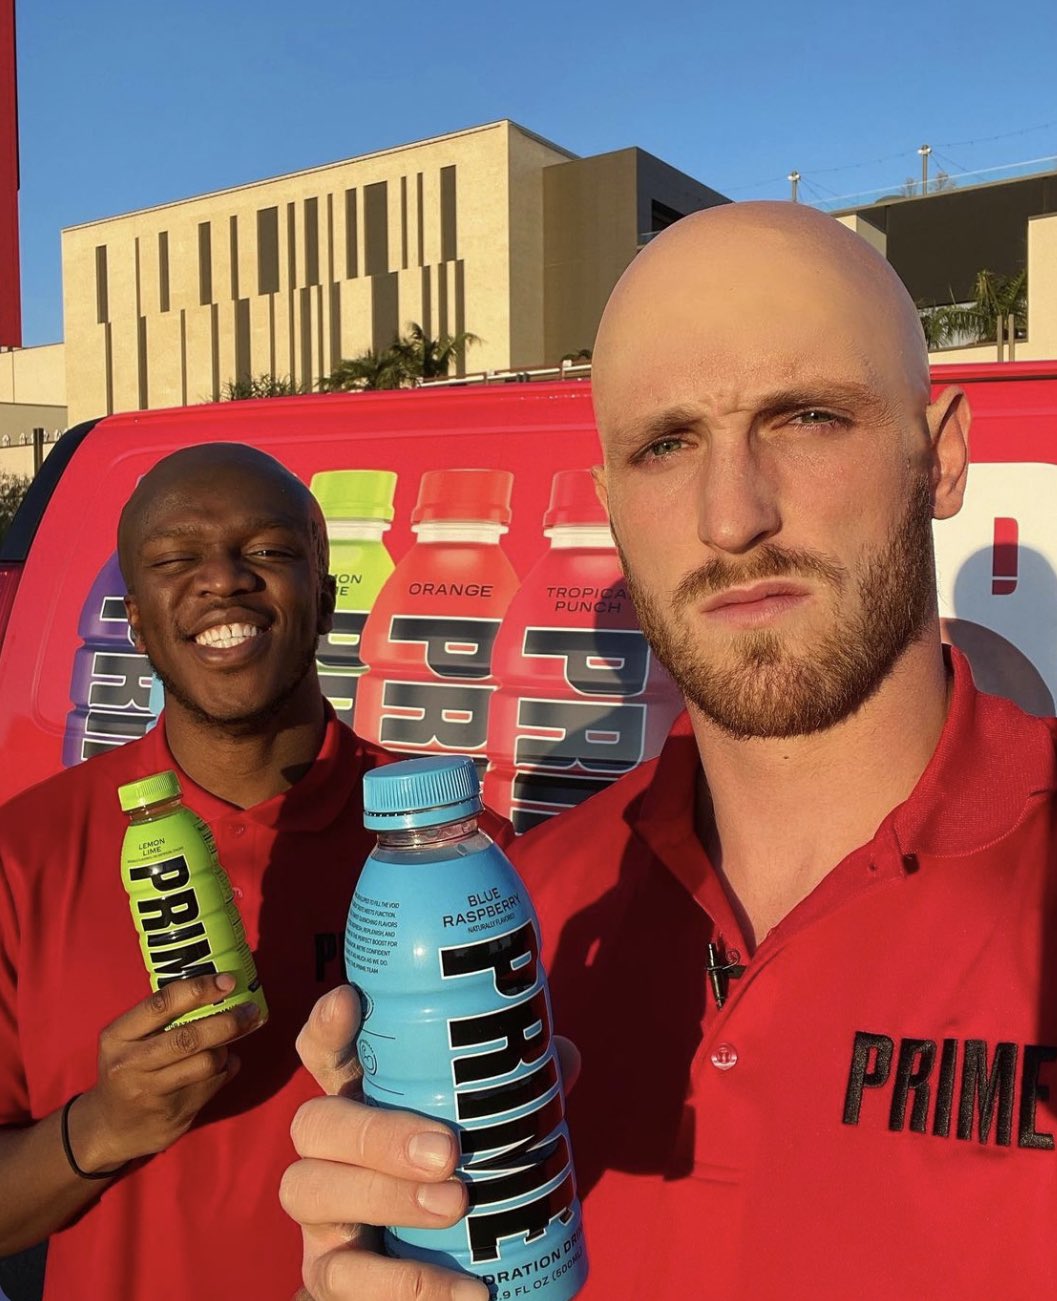 Prime became a viral sensation after being launched by millionaire YouTubers KSI and Logan Paul.